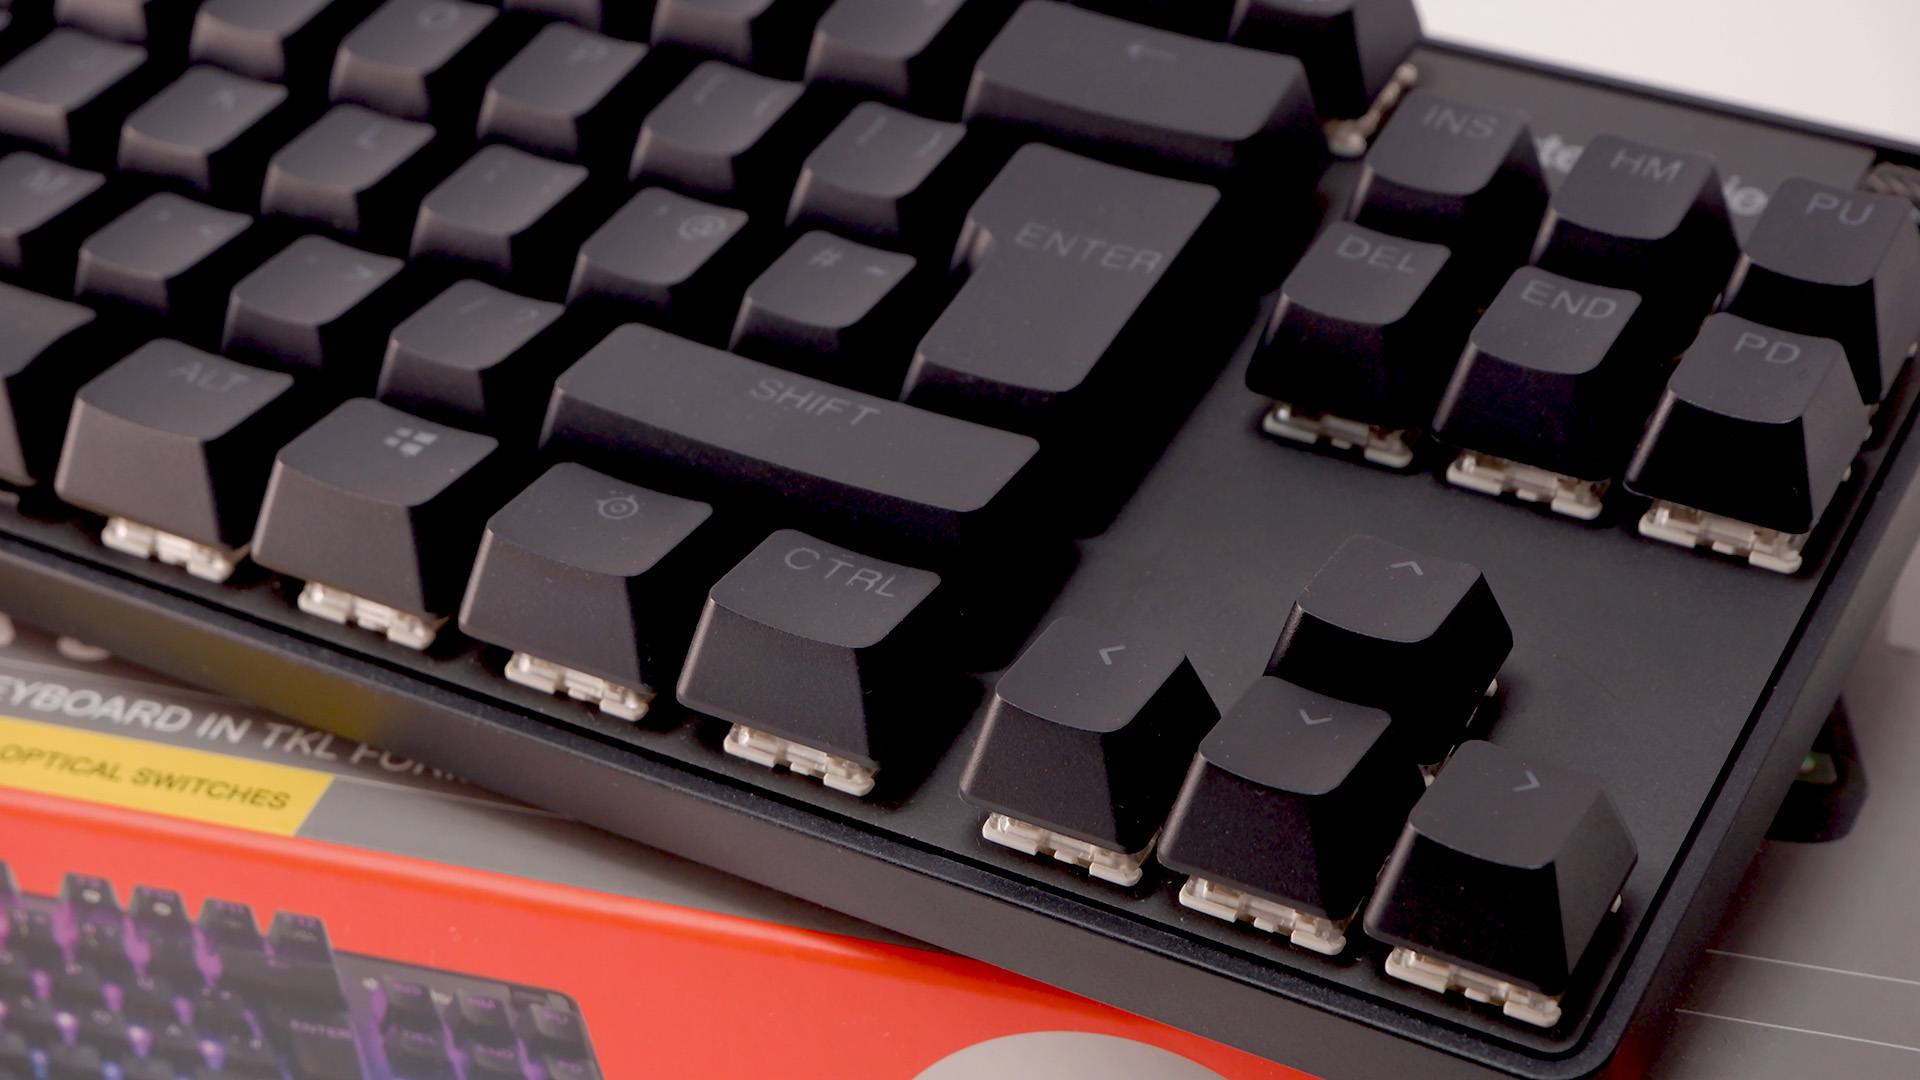 SteelSeries Apex 9 TKL gaming keyboard pictured on the box.